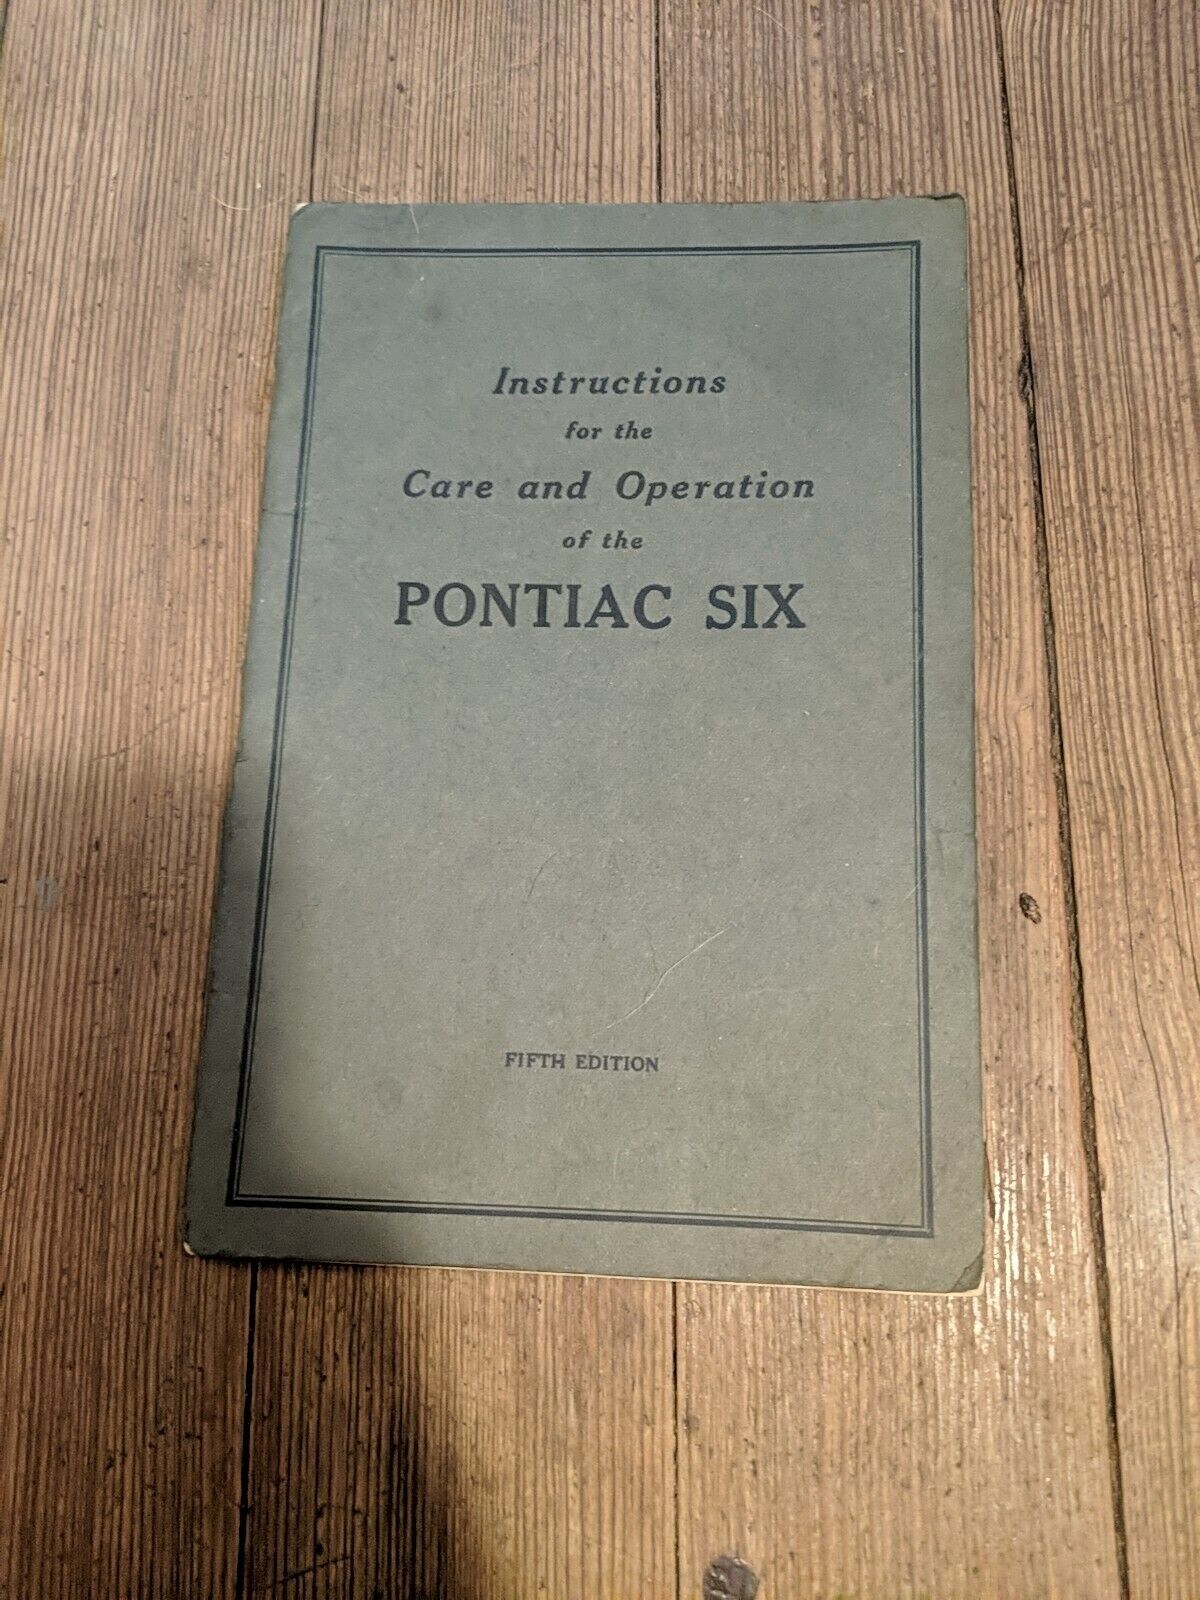 1927-28 INSTRUCTIONS FOR THE CARE AND OPERATION OF THE PONTIAC SIX 5TH VTG RARE